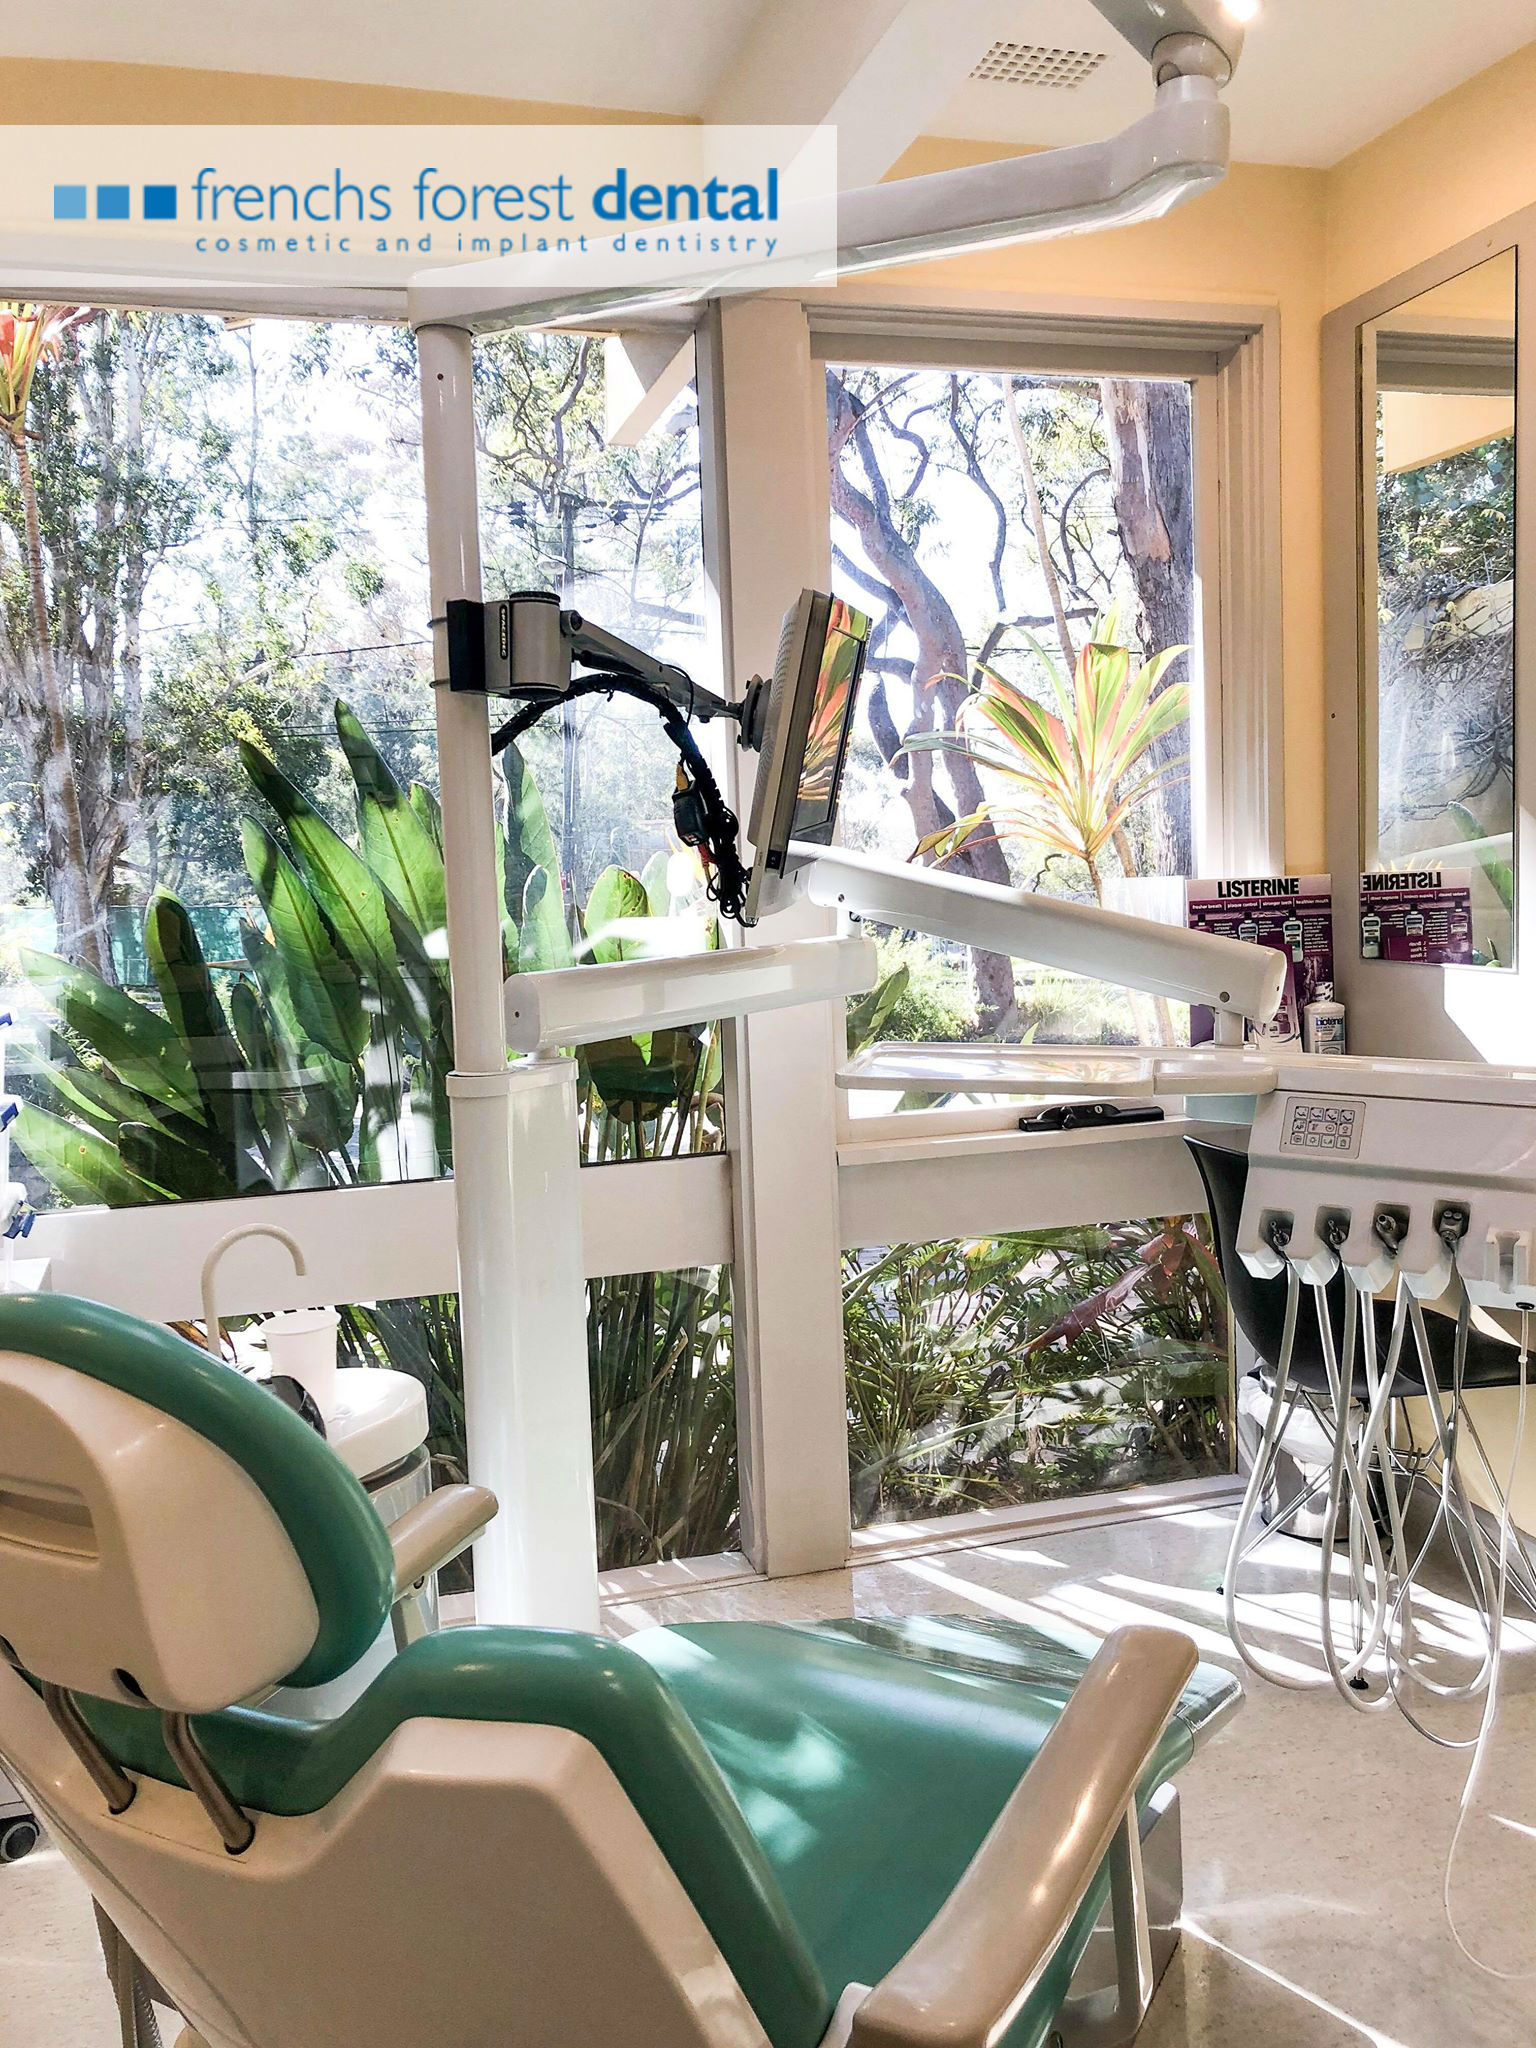 dentist frenchs forest